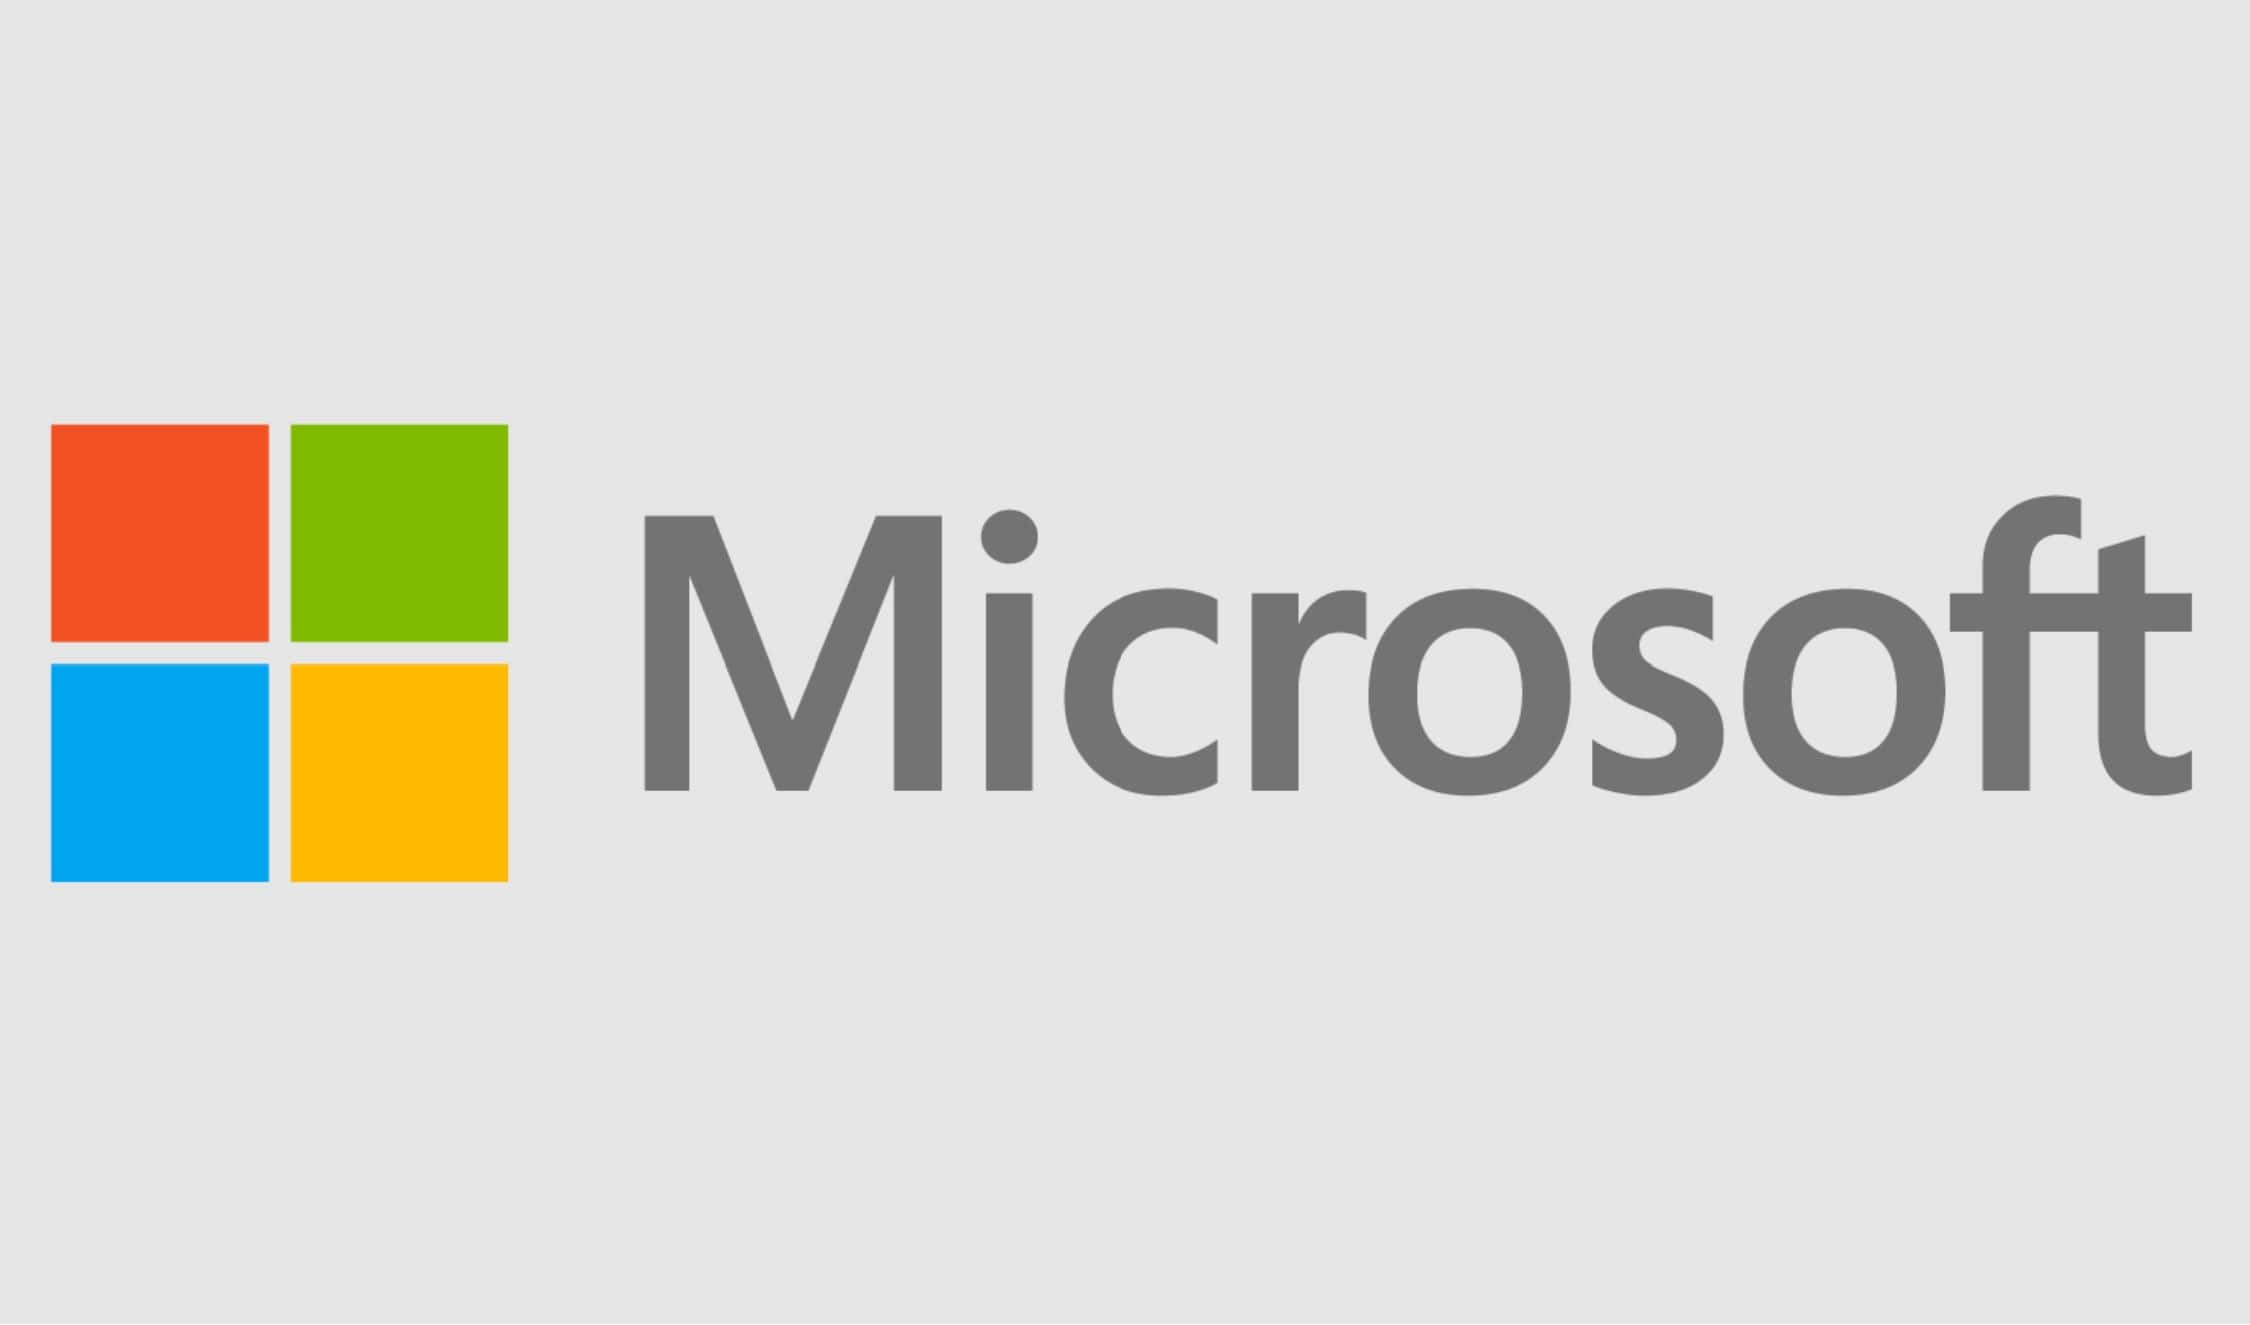 Microsoft announces the Secure Future Initiative to improve security of its products